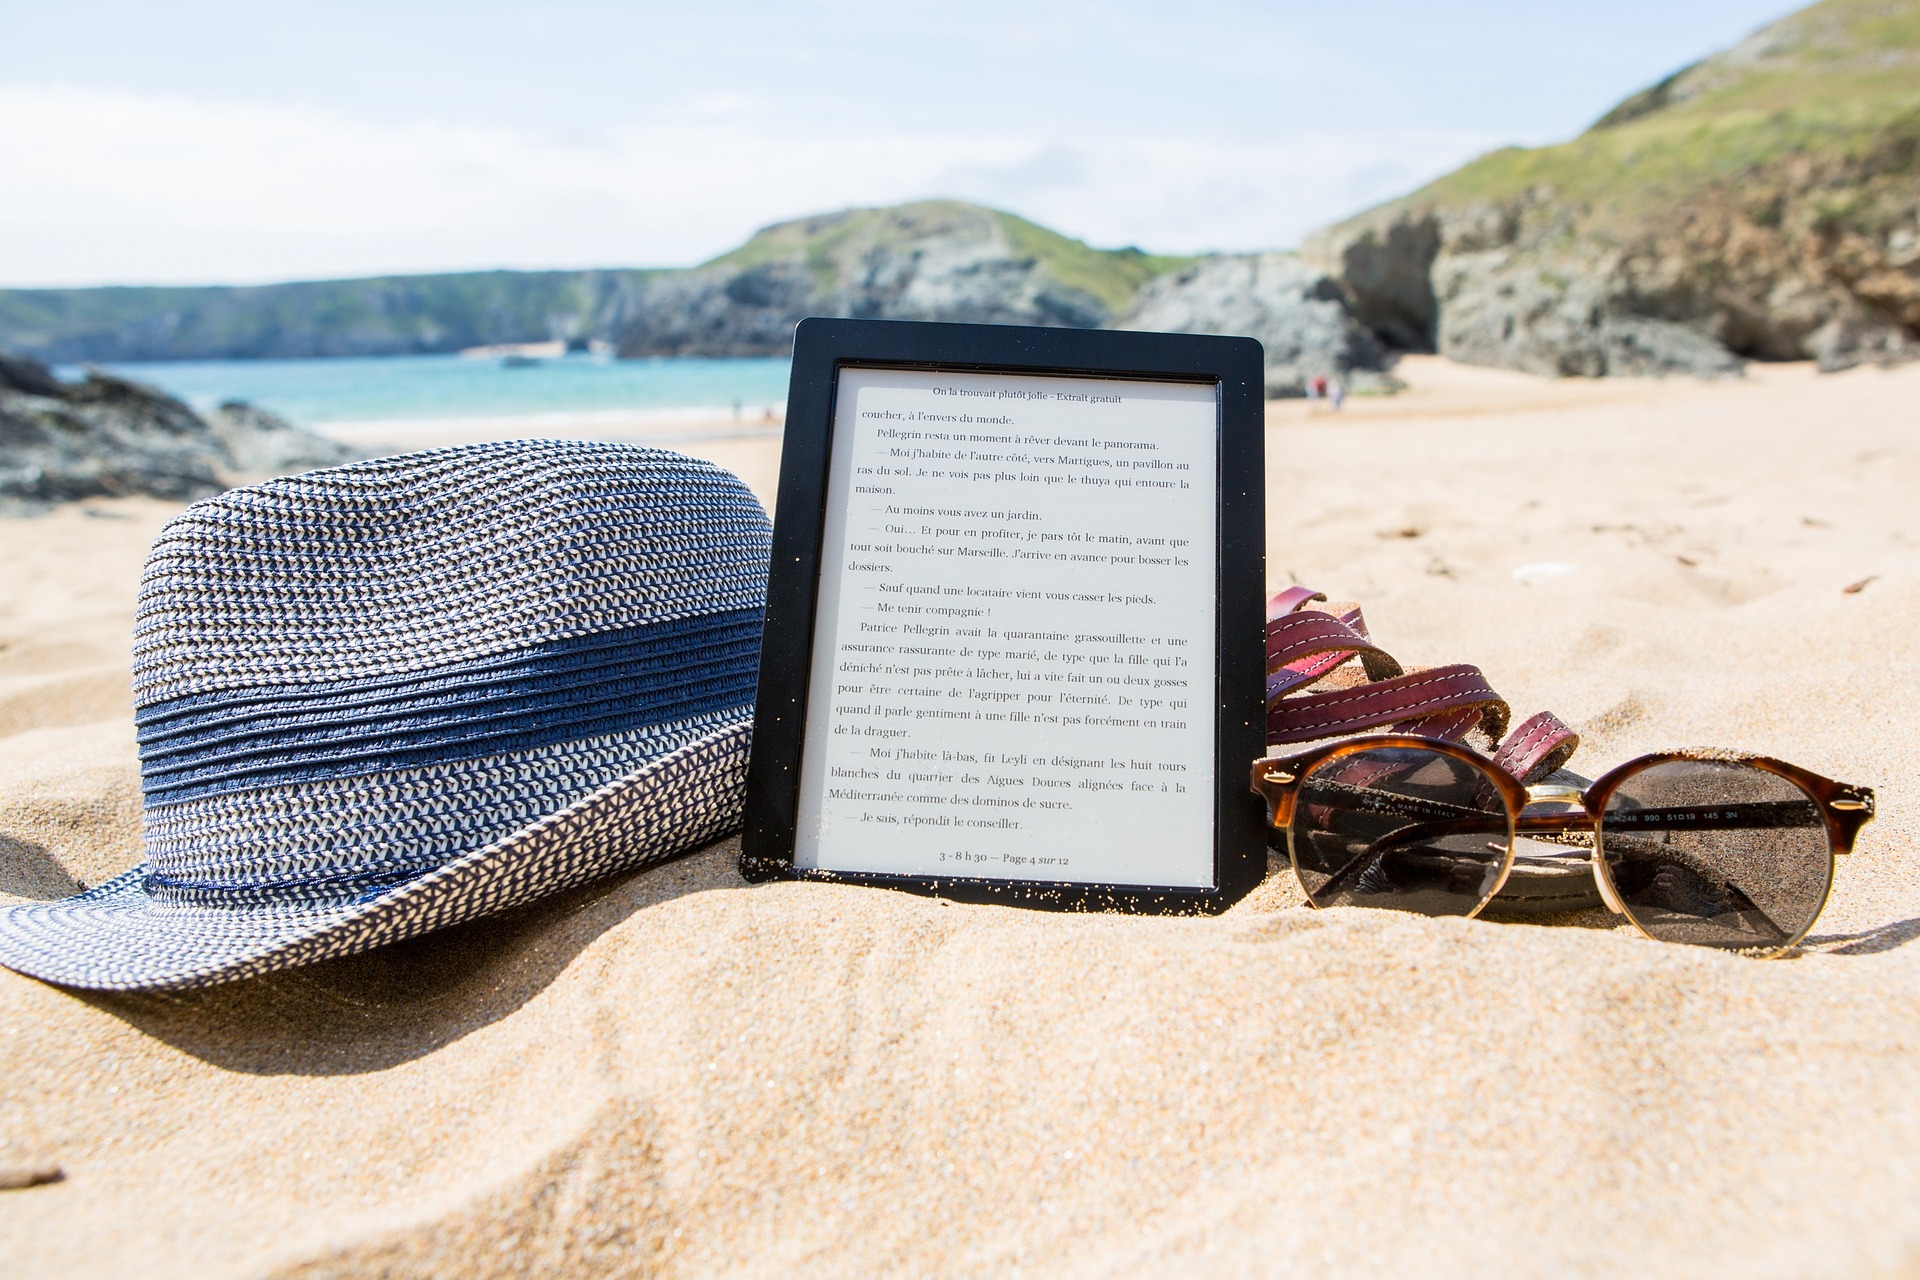 Hat, eReader and sunglasses on beach sand